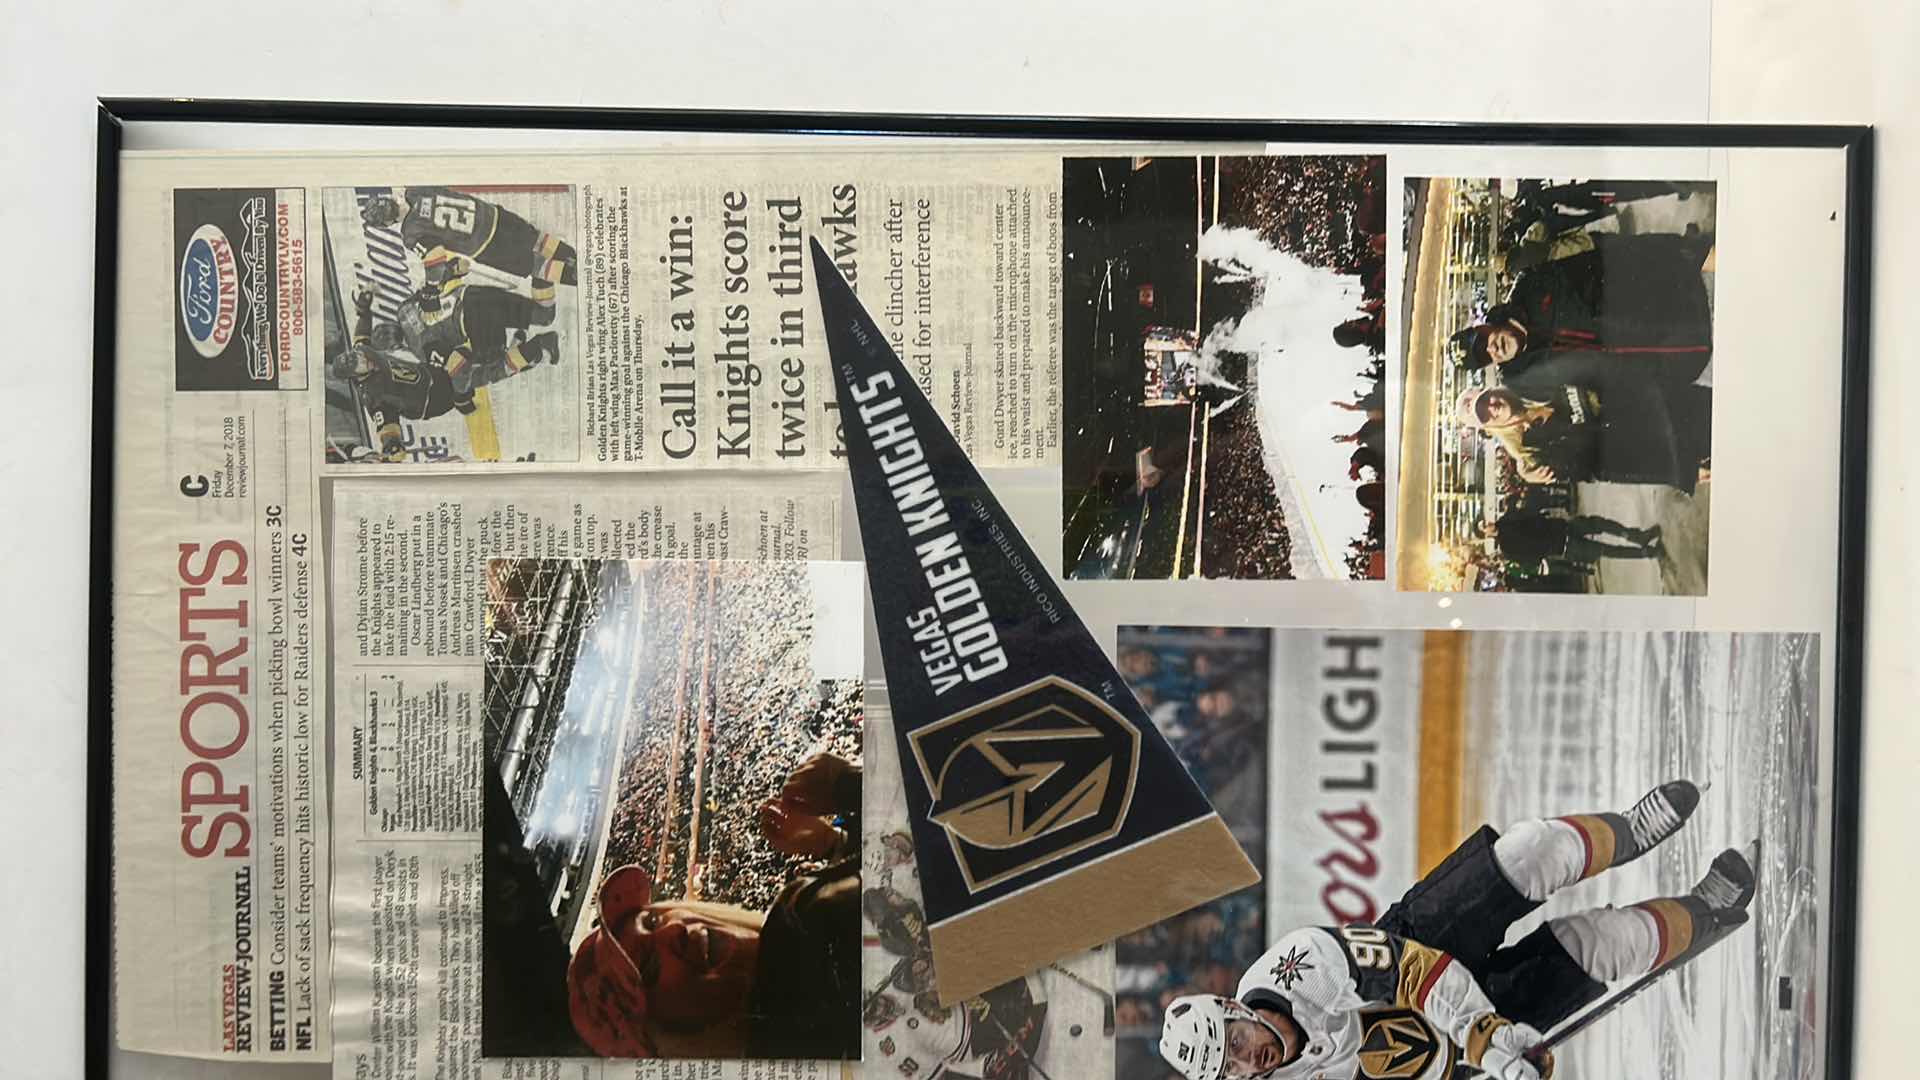 Photo 3 of VEGAS GOLDEN KNIGHTS MEMORABILIA- PLAYER 90 SIGNED PHOTO AND MORE, FRAMED 16” x 20